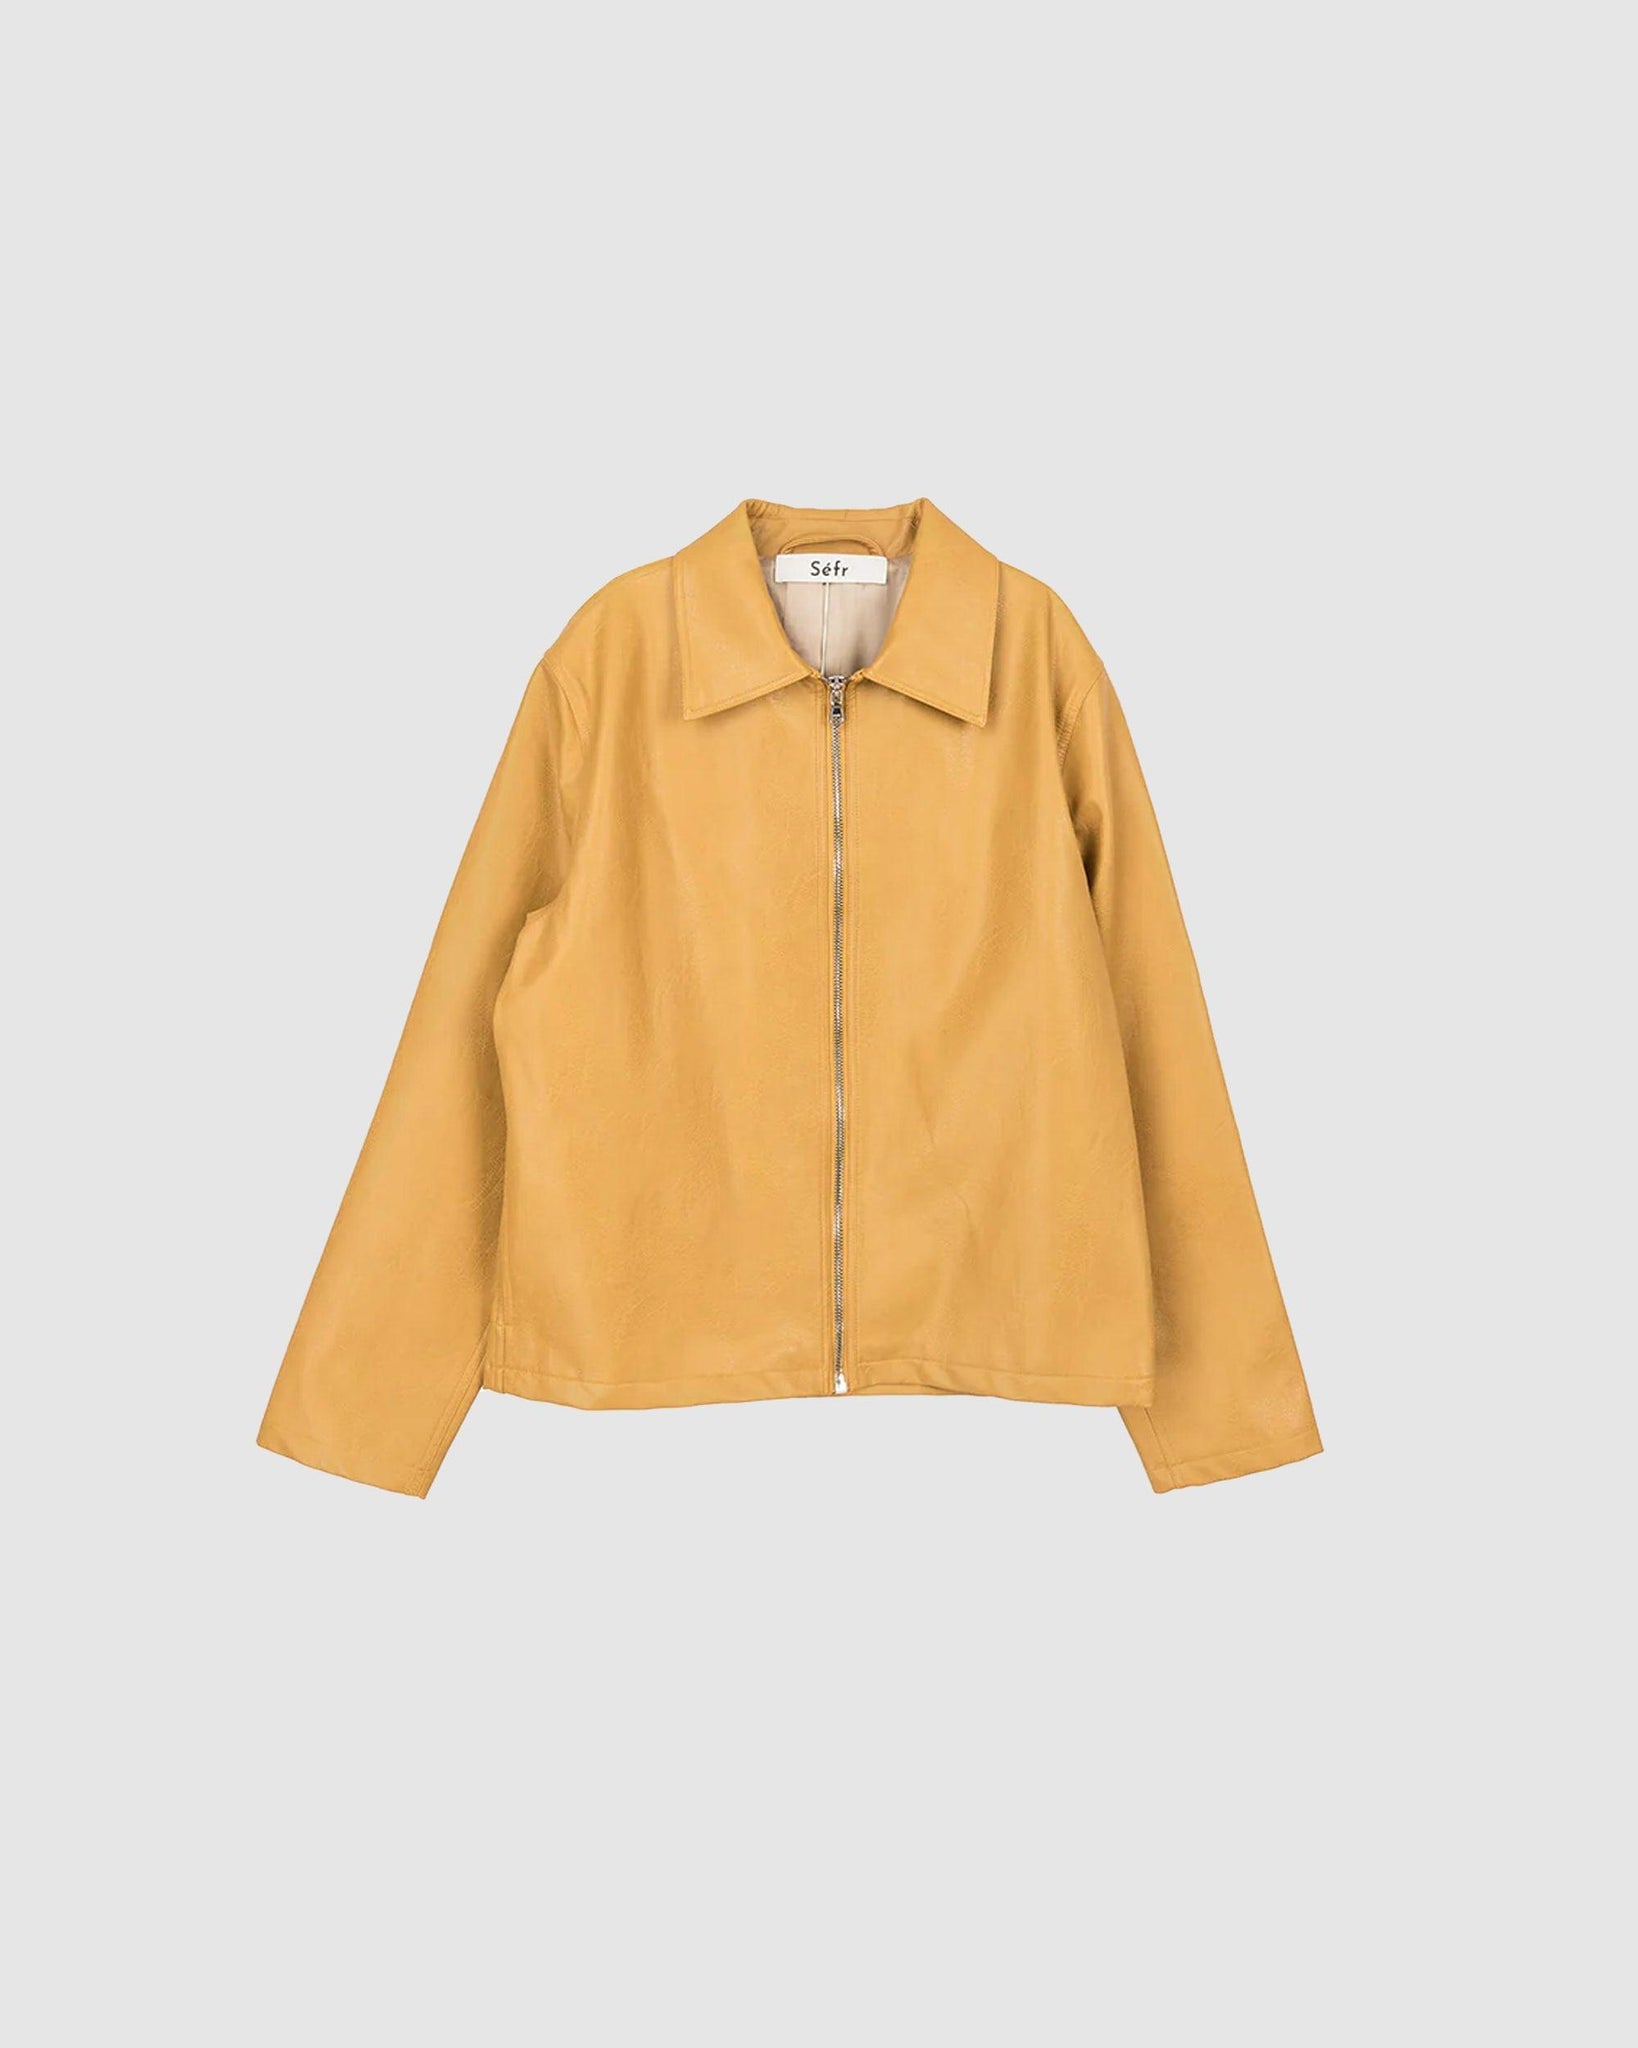 Truth Jacket Spring - {{ collection.title }} - Chinatown Country Club 